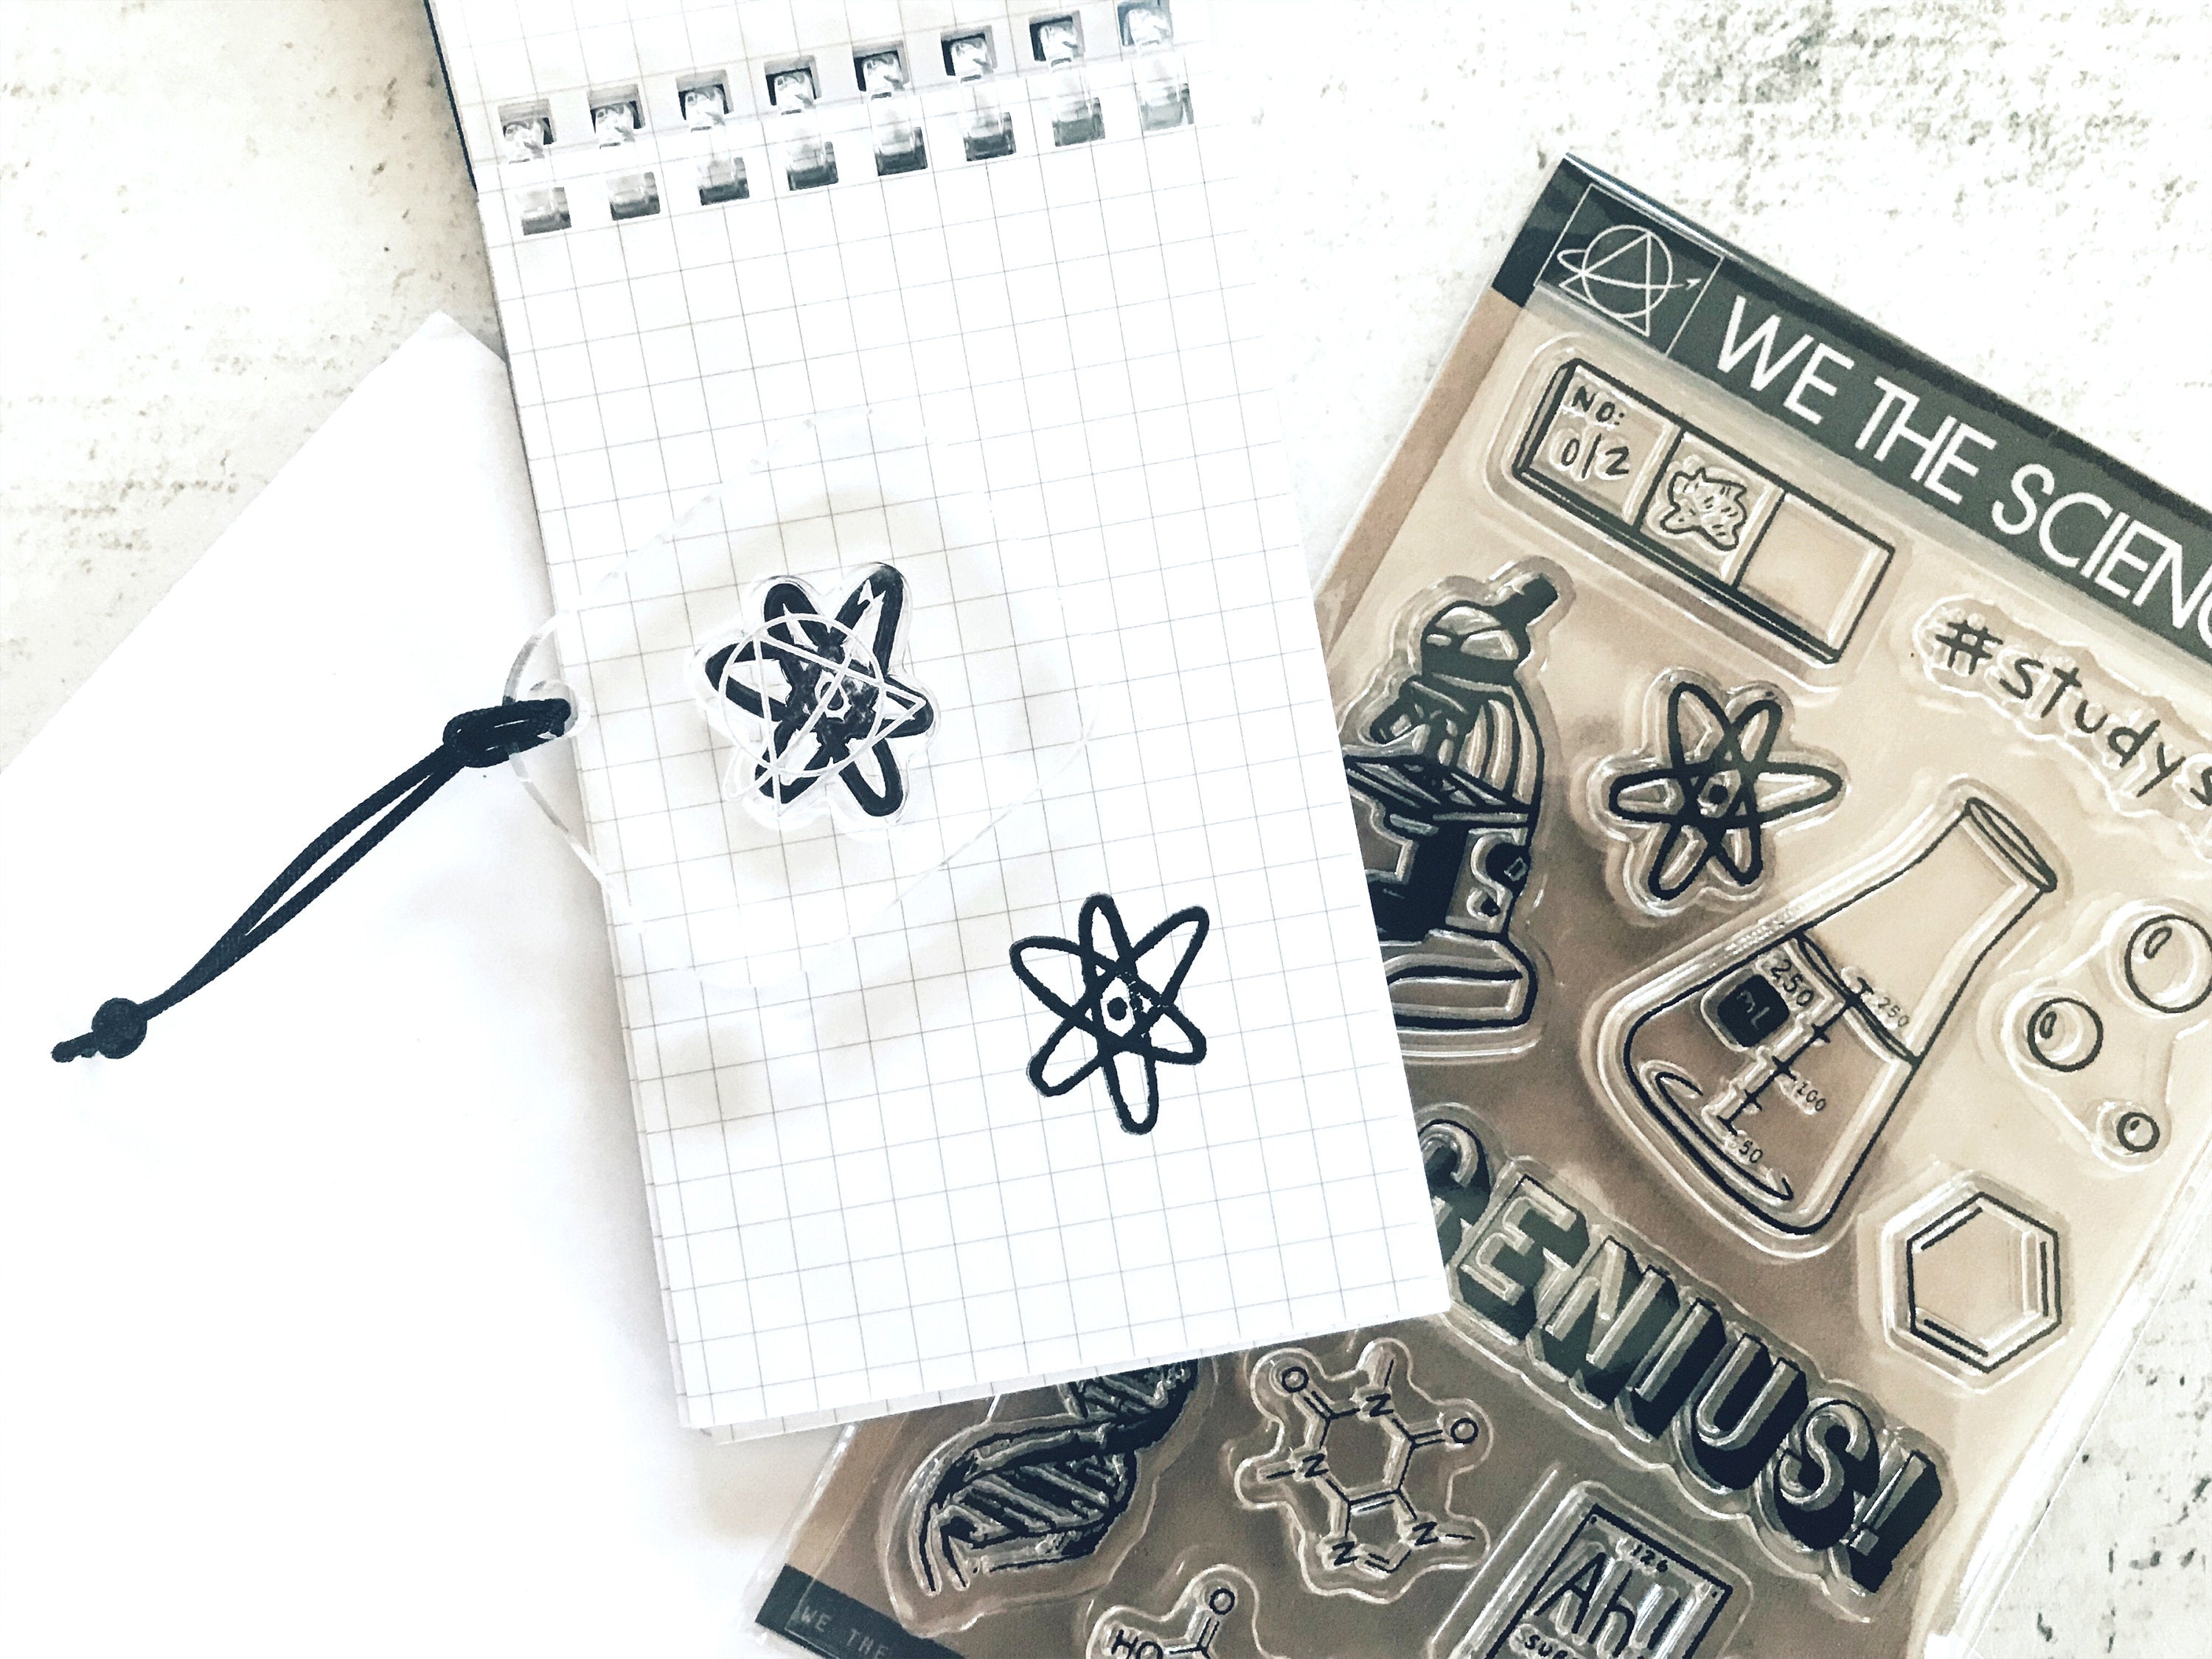 Phys-Math Cling Stamp Set - Math & Physics Motivational Teacher Rubber Stamps - Bujo Planner Geek Stationery